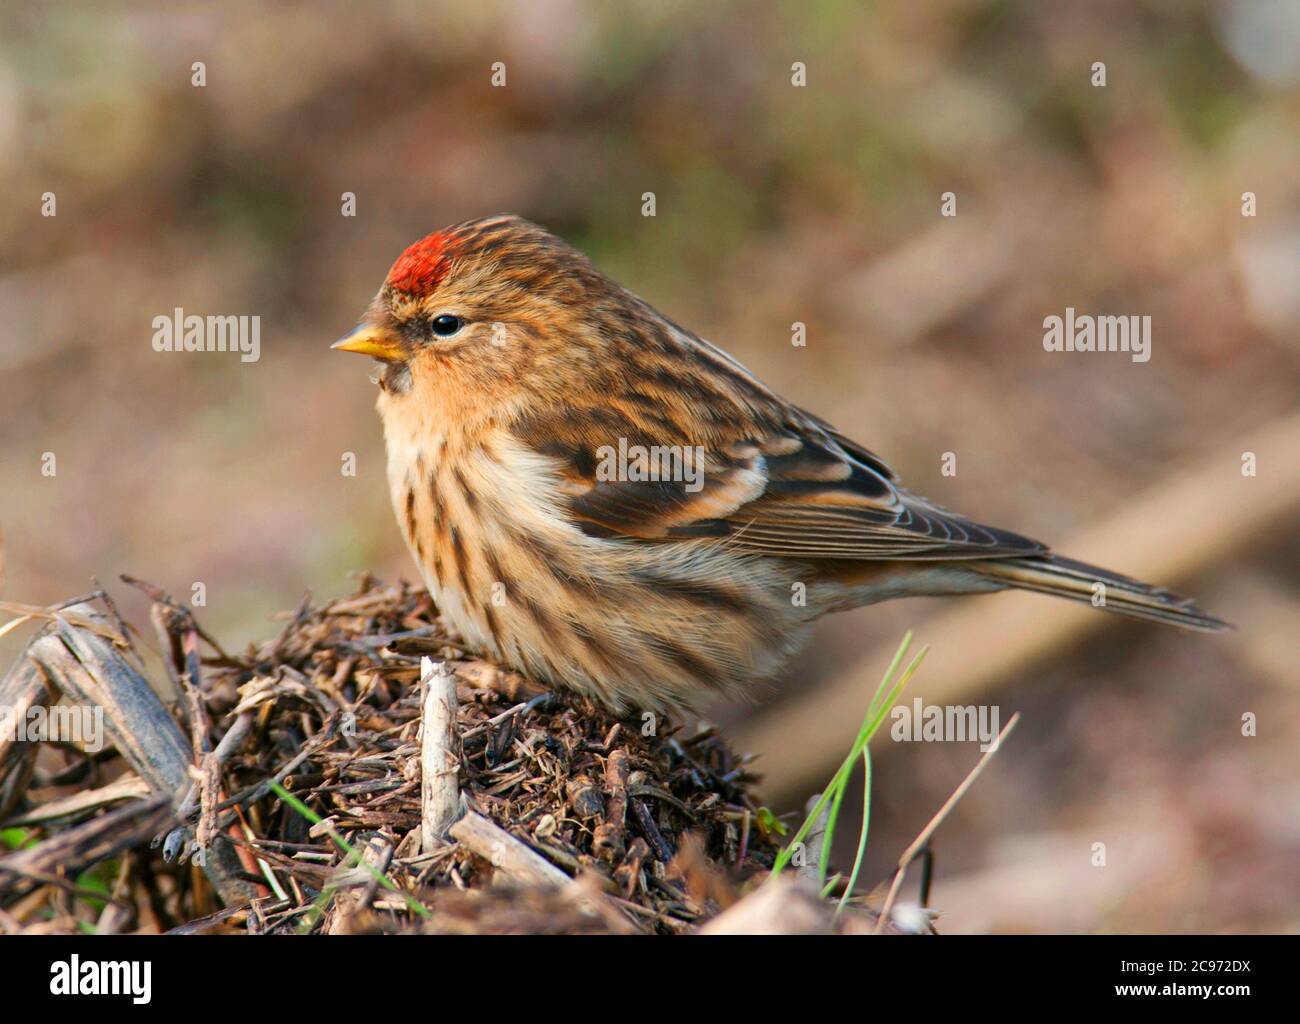 redpoll, common redpoll (Carduelis flammea cabaret, Carduelis cabaret), perching on the ground, side view, United Kingdom, England, Norfolk Stock Photo